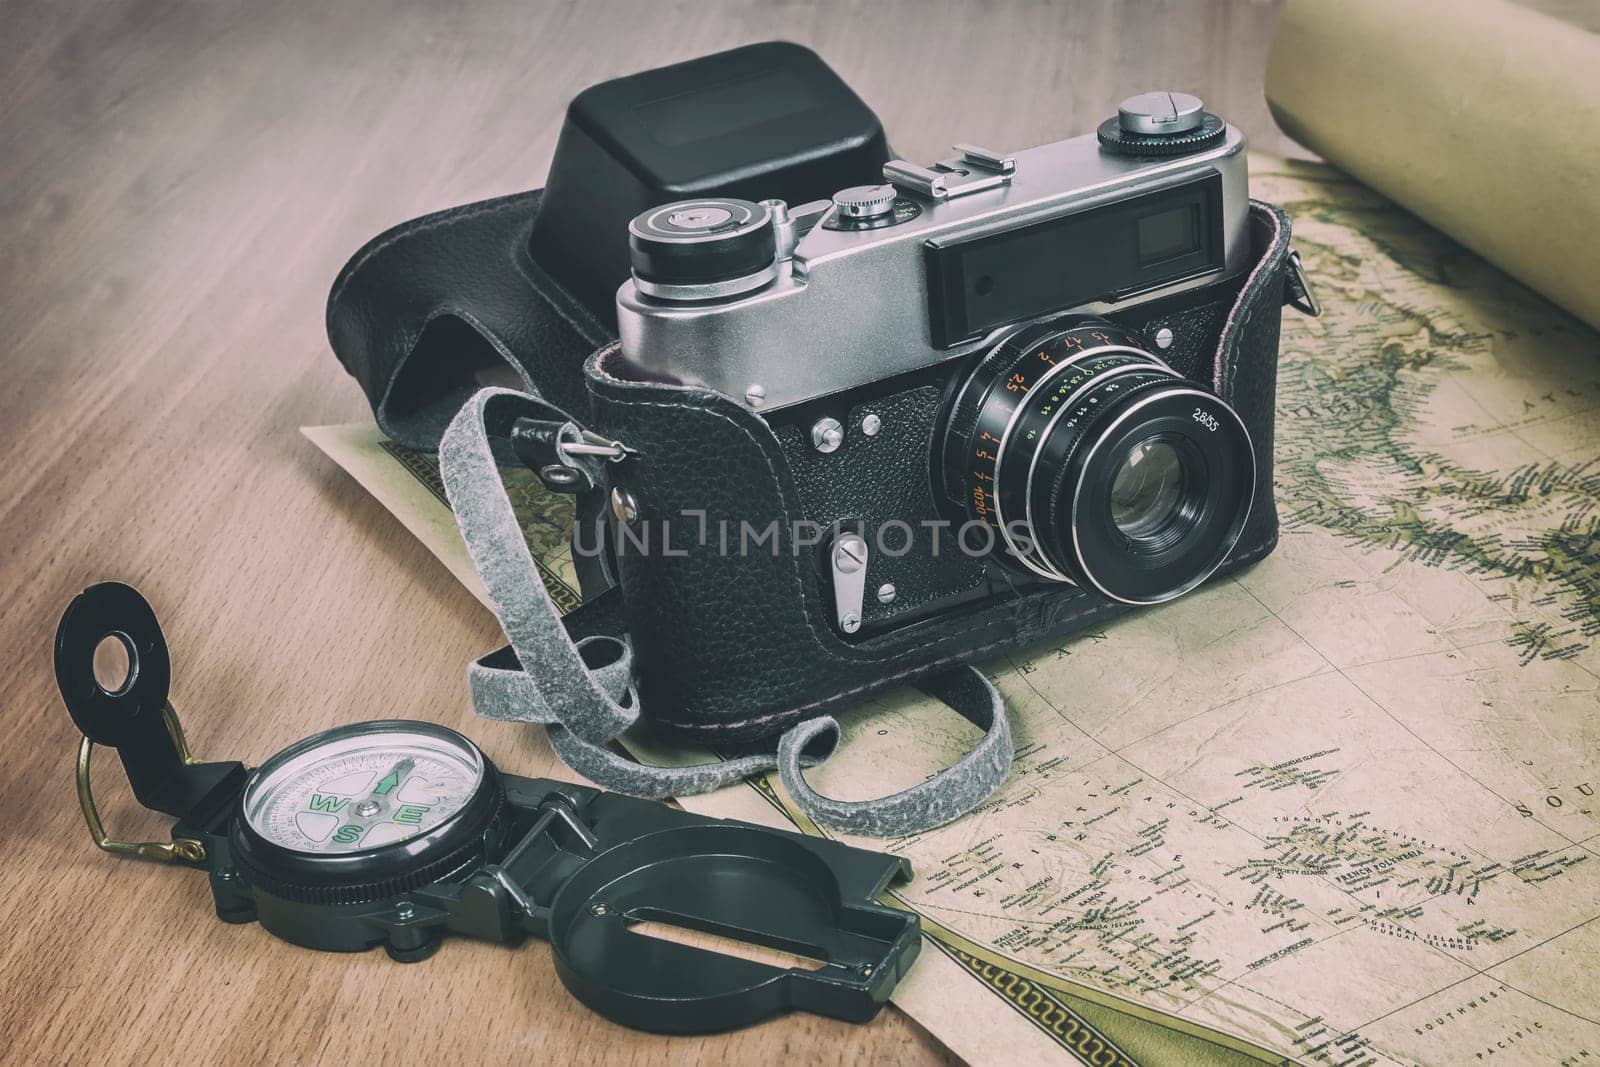 Items needed for travel: a large backpack, compass, camera, map of the world. Vintage items in retro style